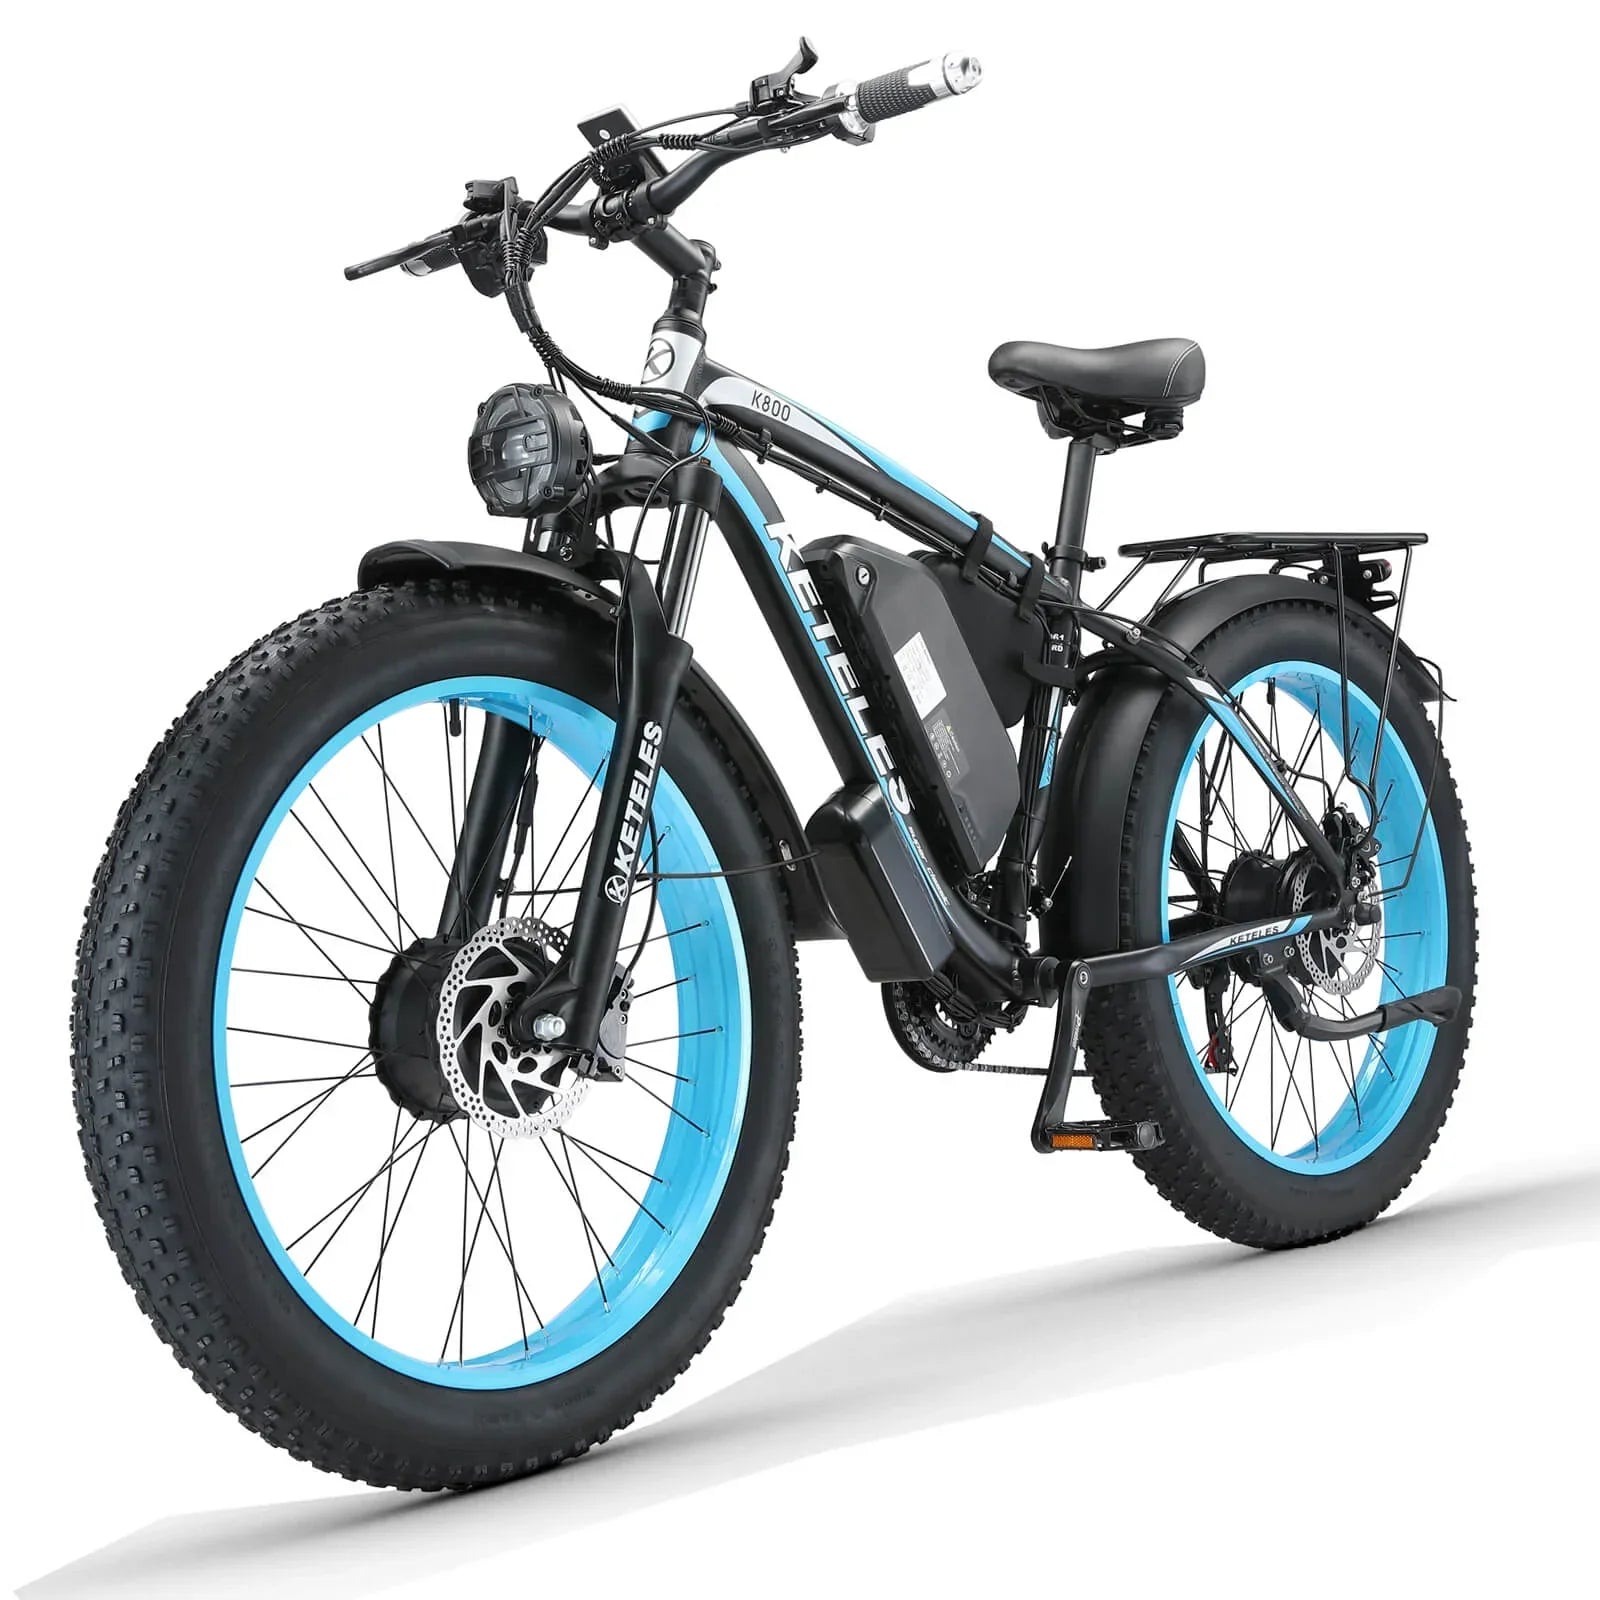 KETELES K800 2×1000W dual Motors Electric Bike - Preorder - Pogo cycles UK -cycle to work scheme available